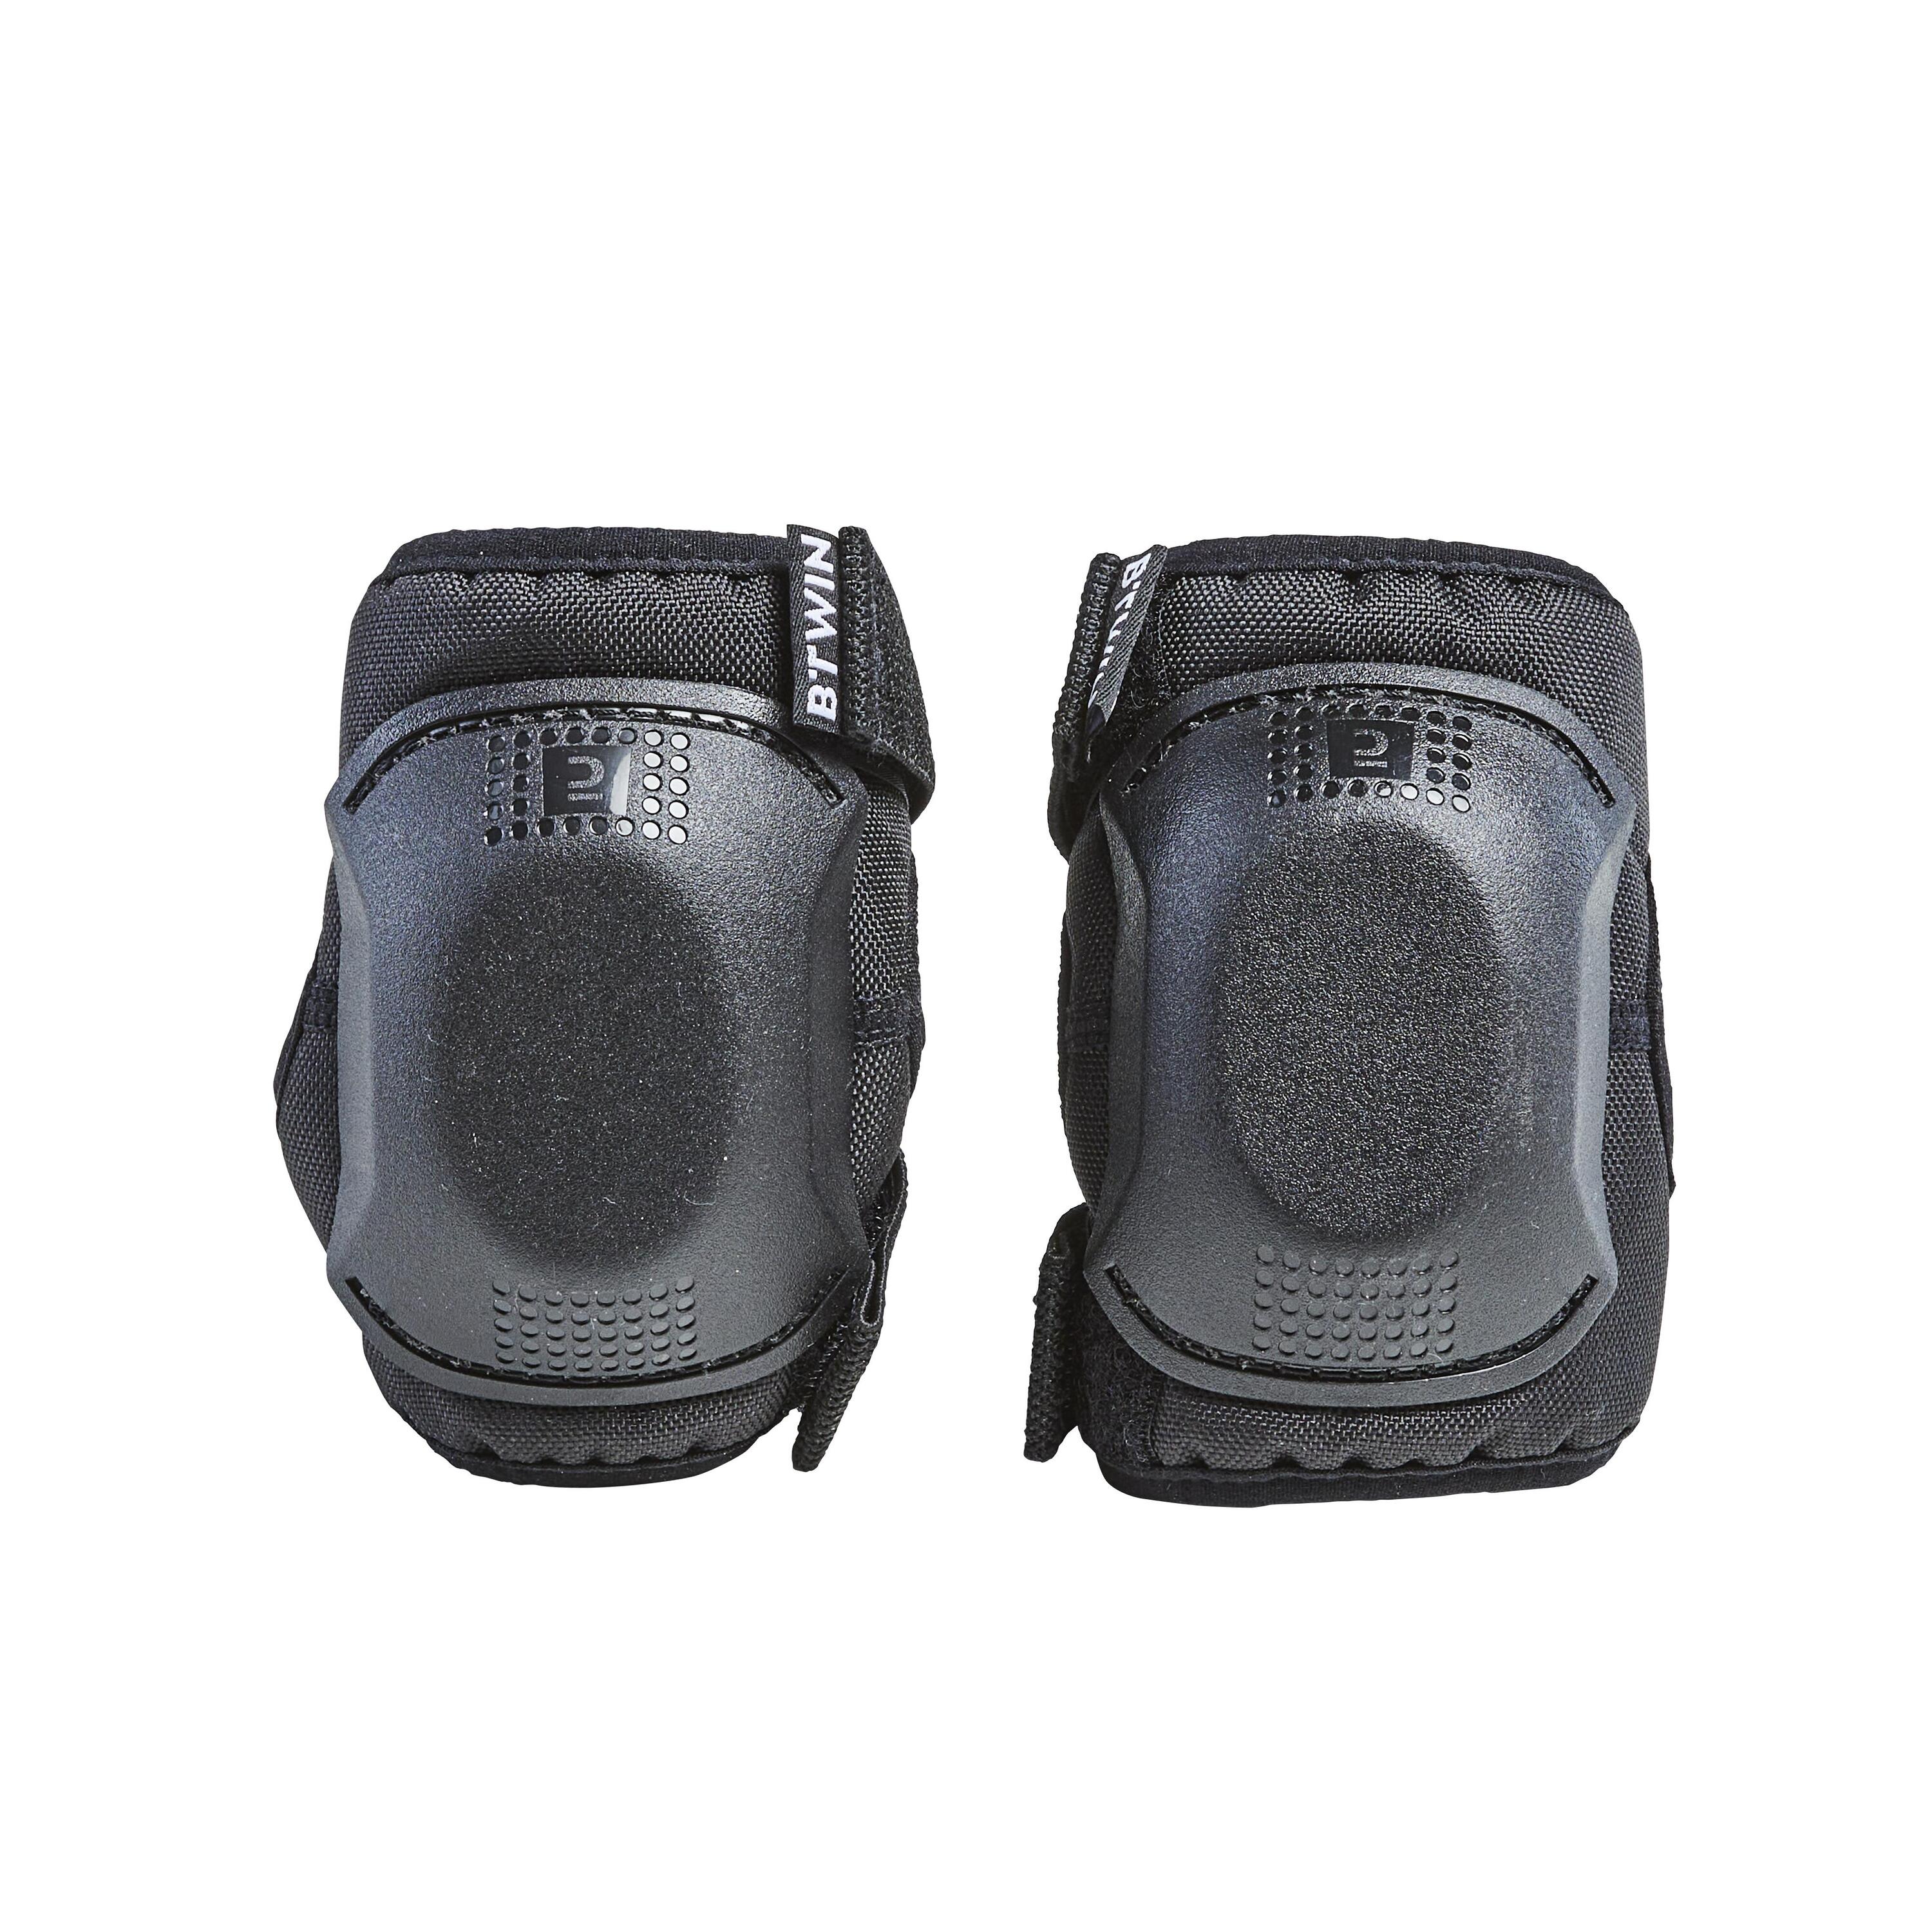 One Size Cycling Elbow and Knee Protectors Set 3-6 Years - Black 3/10